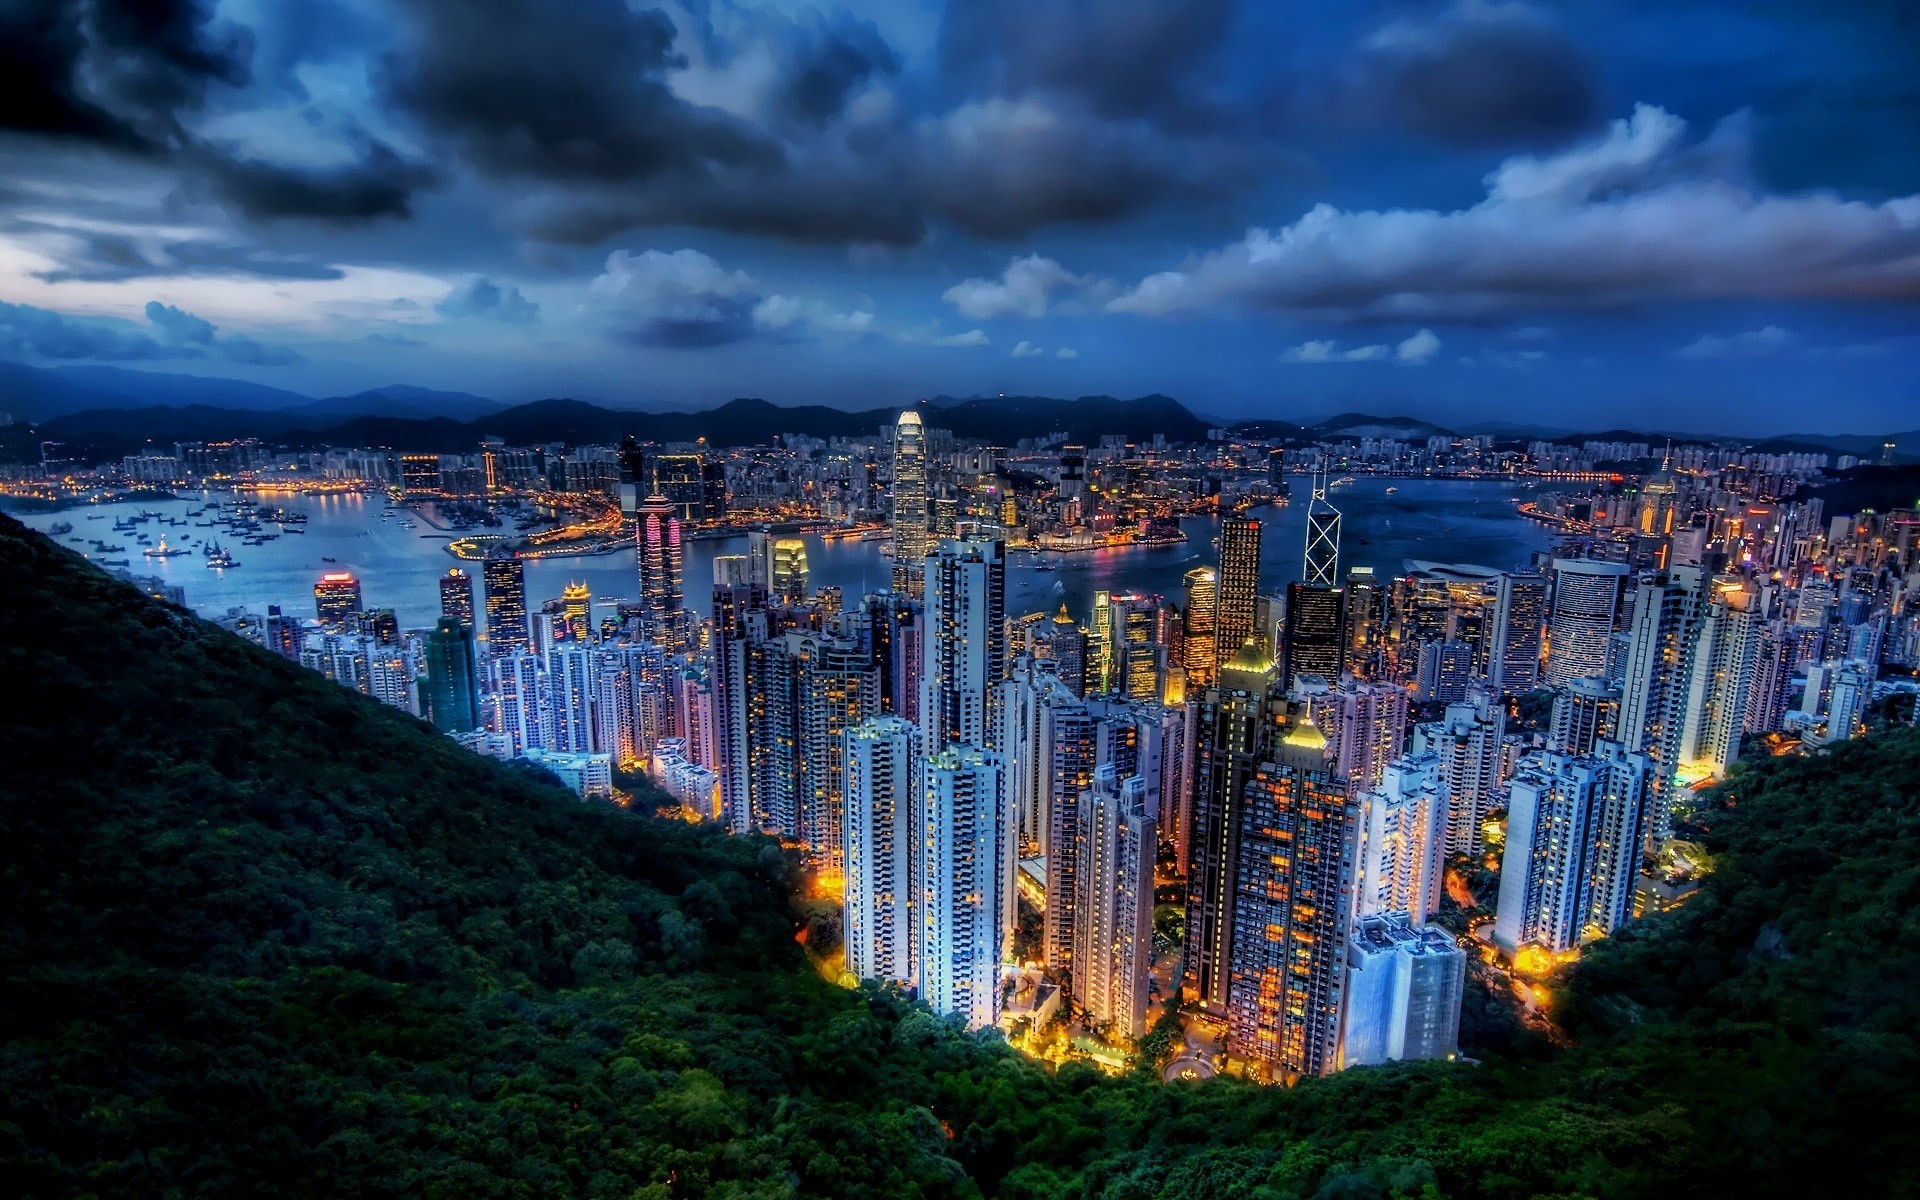 Hong Kong cityscape with stunning skyscrapers and urban landscapes.